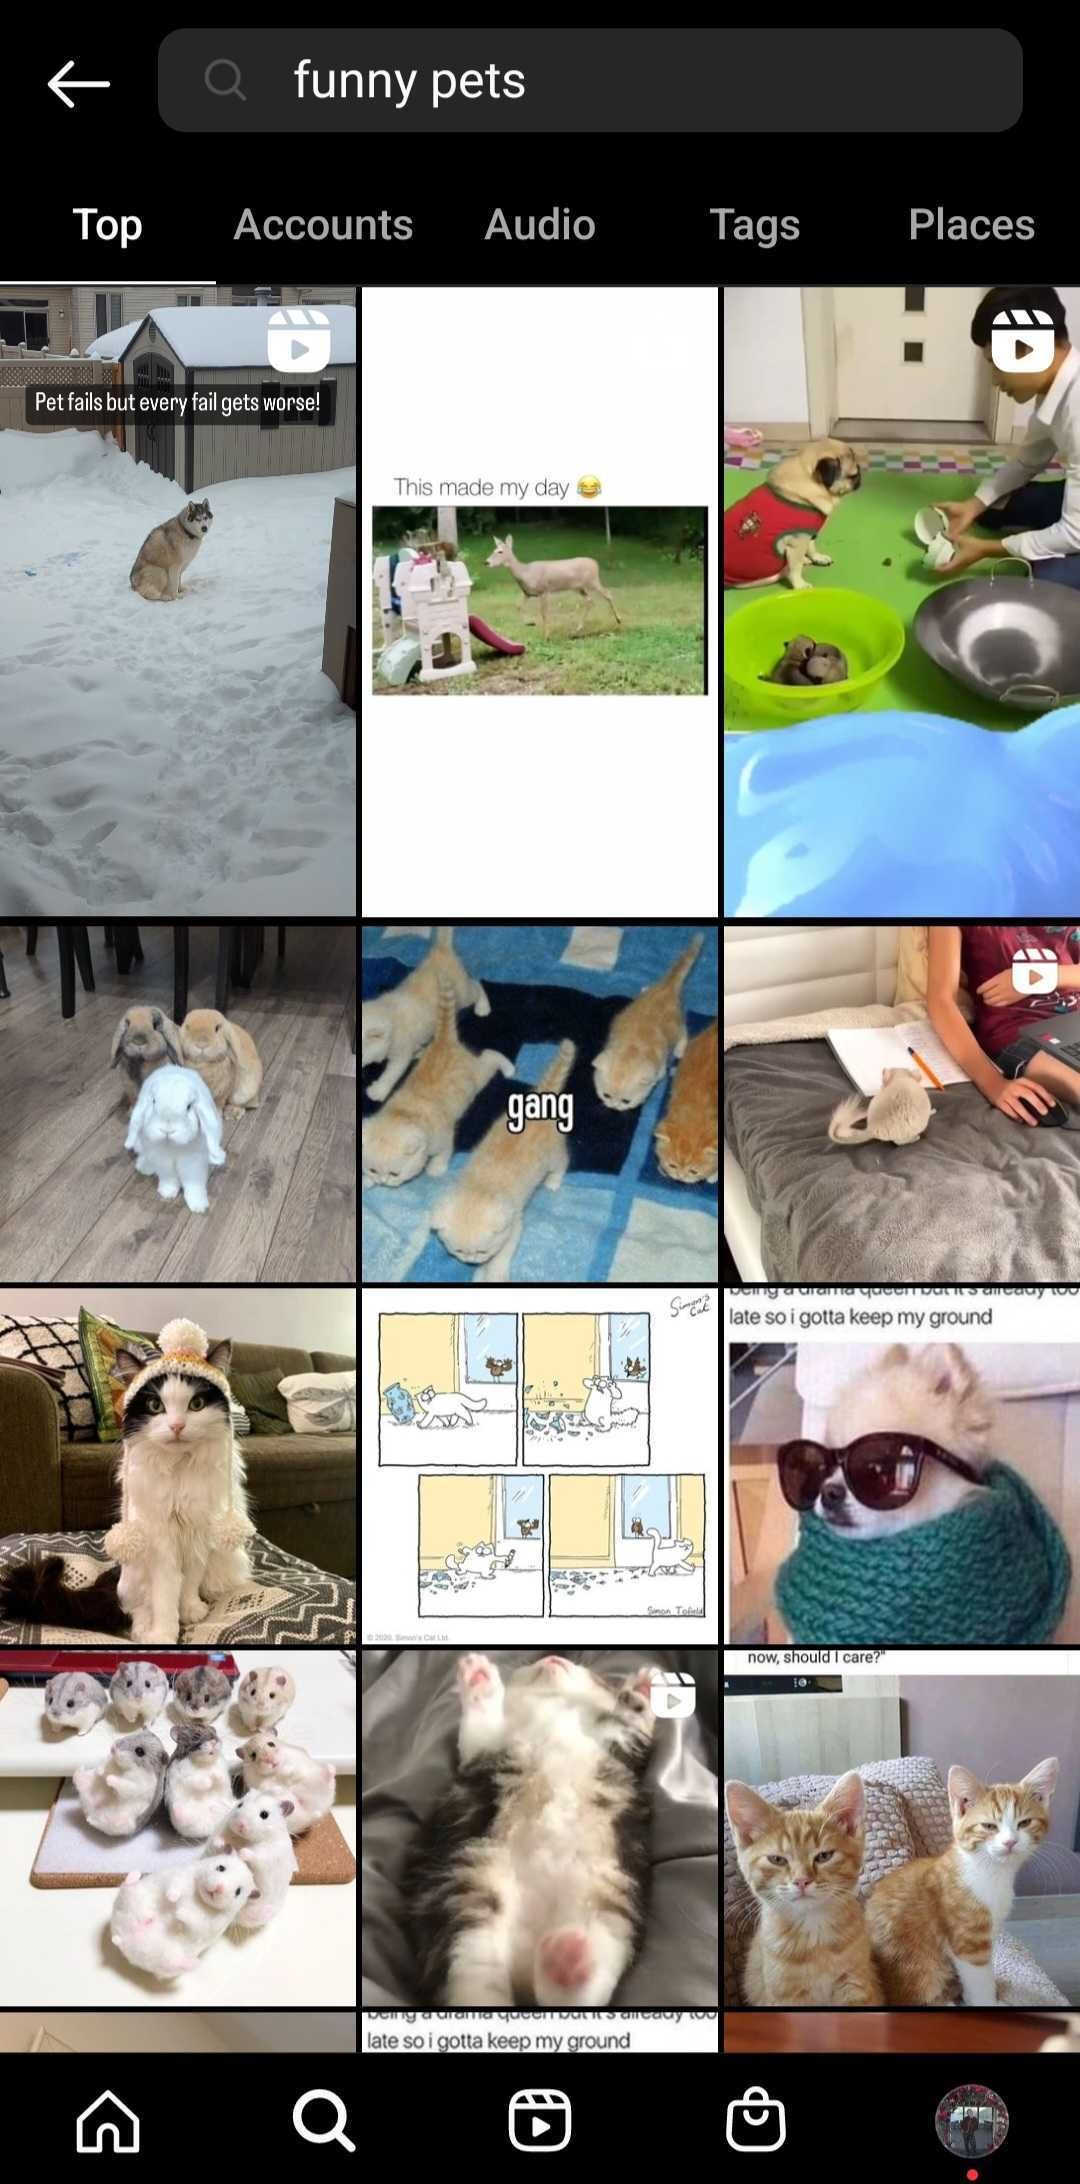 screenshot of funny pets search results on instagram app